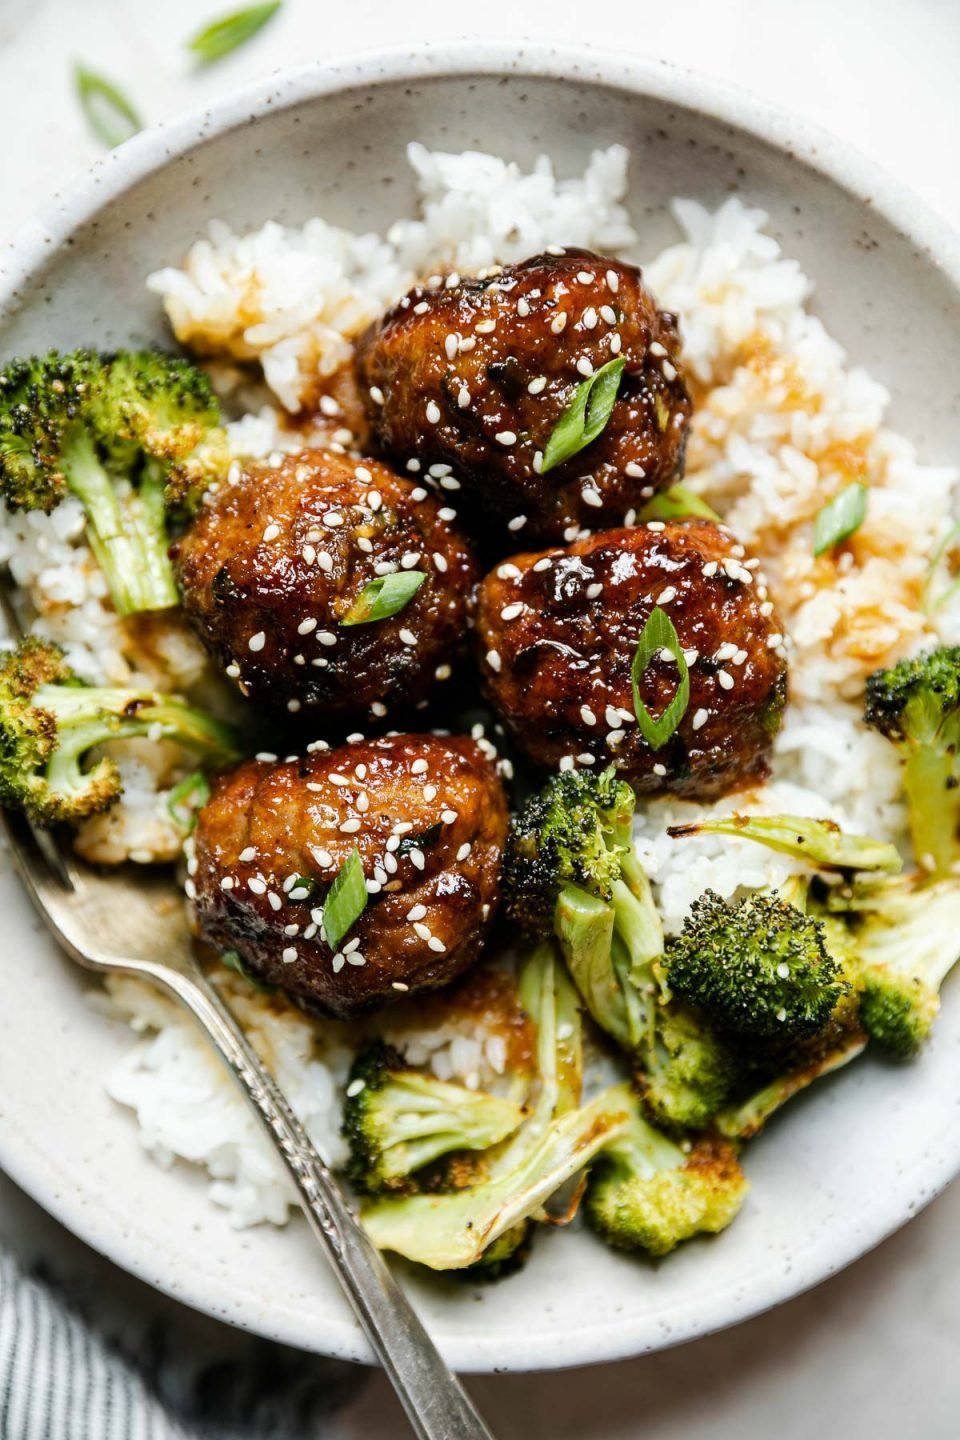 Soy-glazed ginger meatballs plated in large ceramic bowl over rice with roasted broccoli. The meatballs are garnished with sesame seeds & sliced green onions, & a fork is nestled into the rice. The bowl sits atop a creamy cement surface, surrounded by a striped linen napkin & a small wooden bowl of sesame seeds.